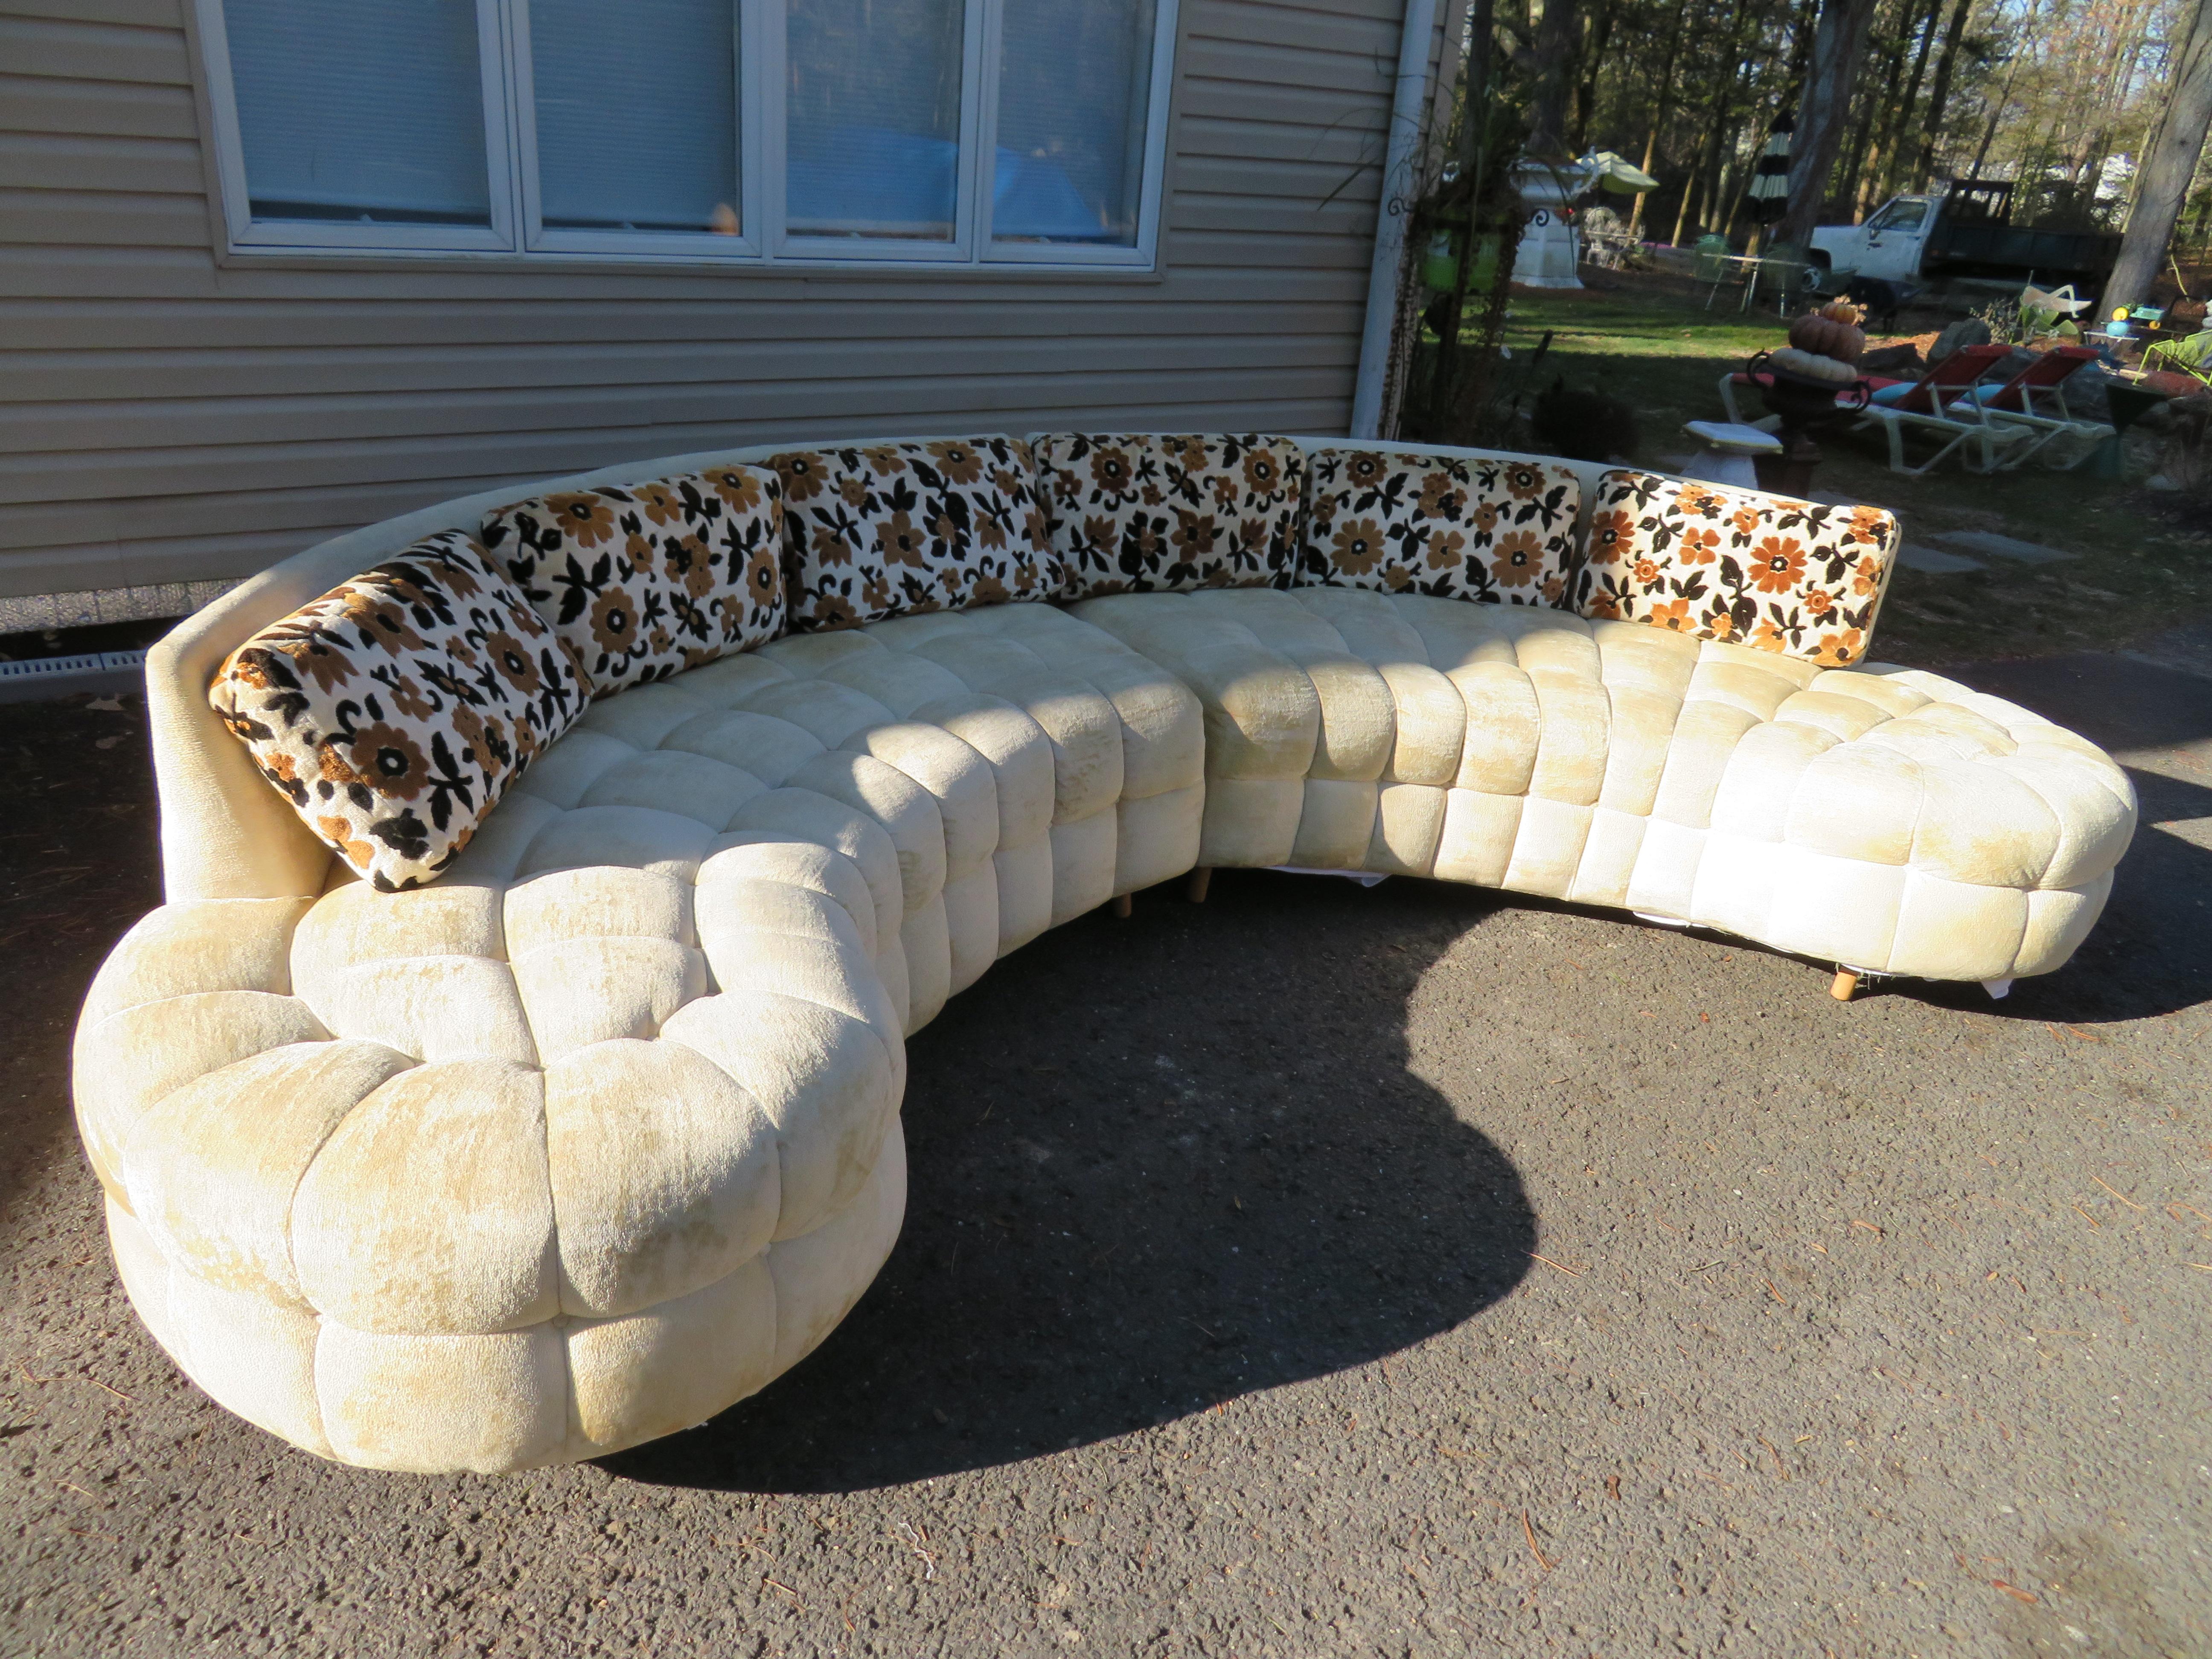 Wonderful Curved Serpentine Two-Piece Adrian Pearsall Style Sectional Sofa 2